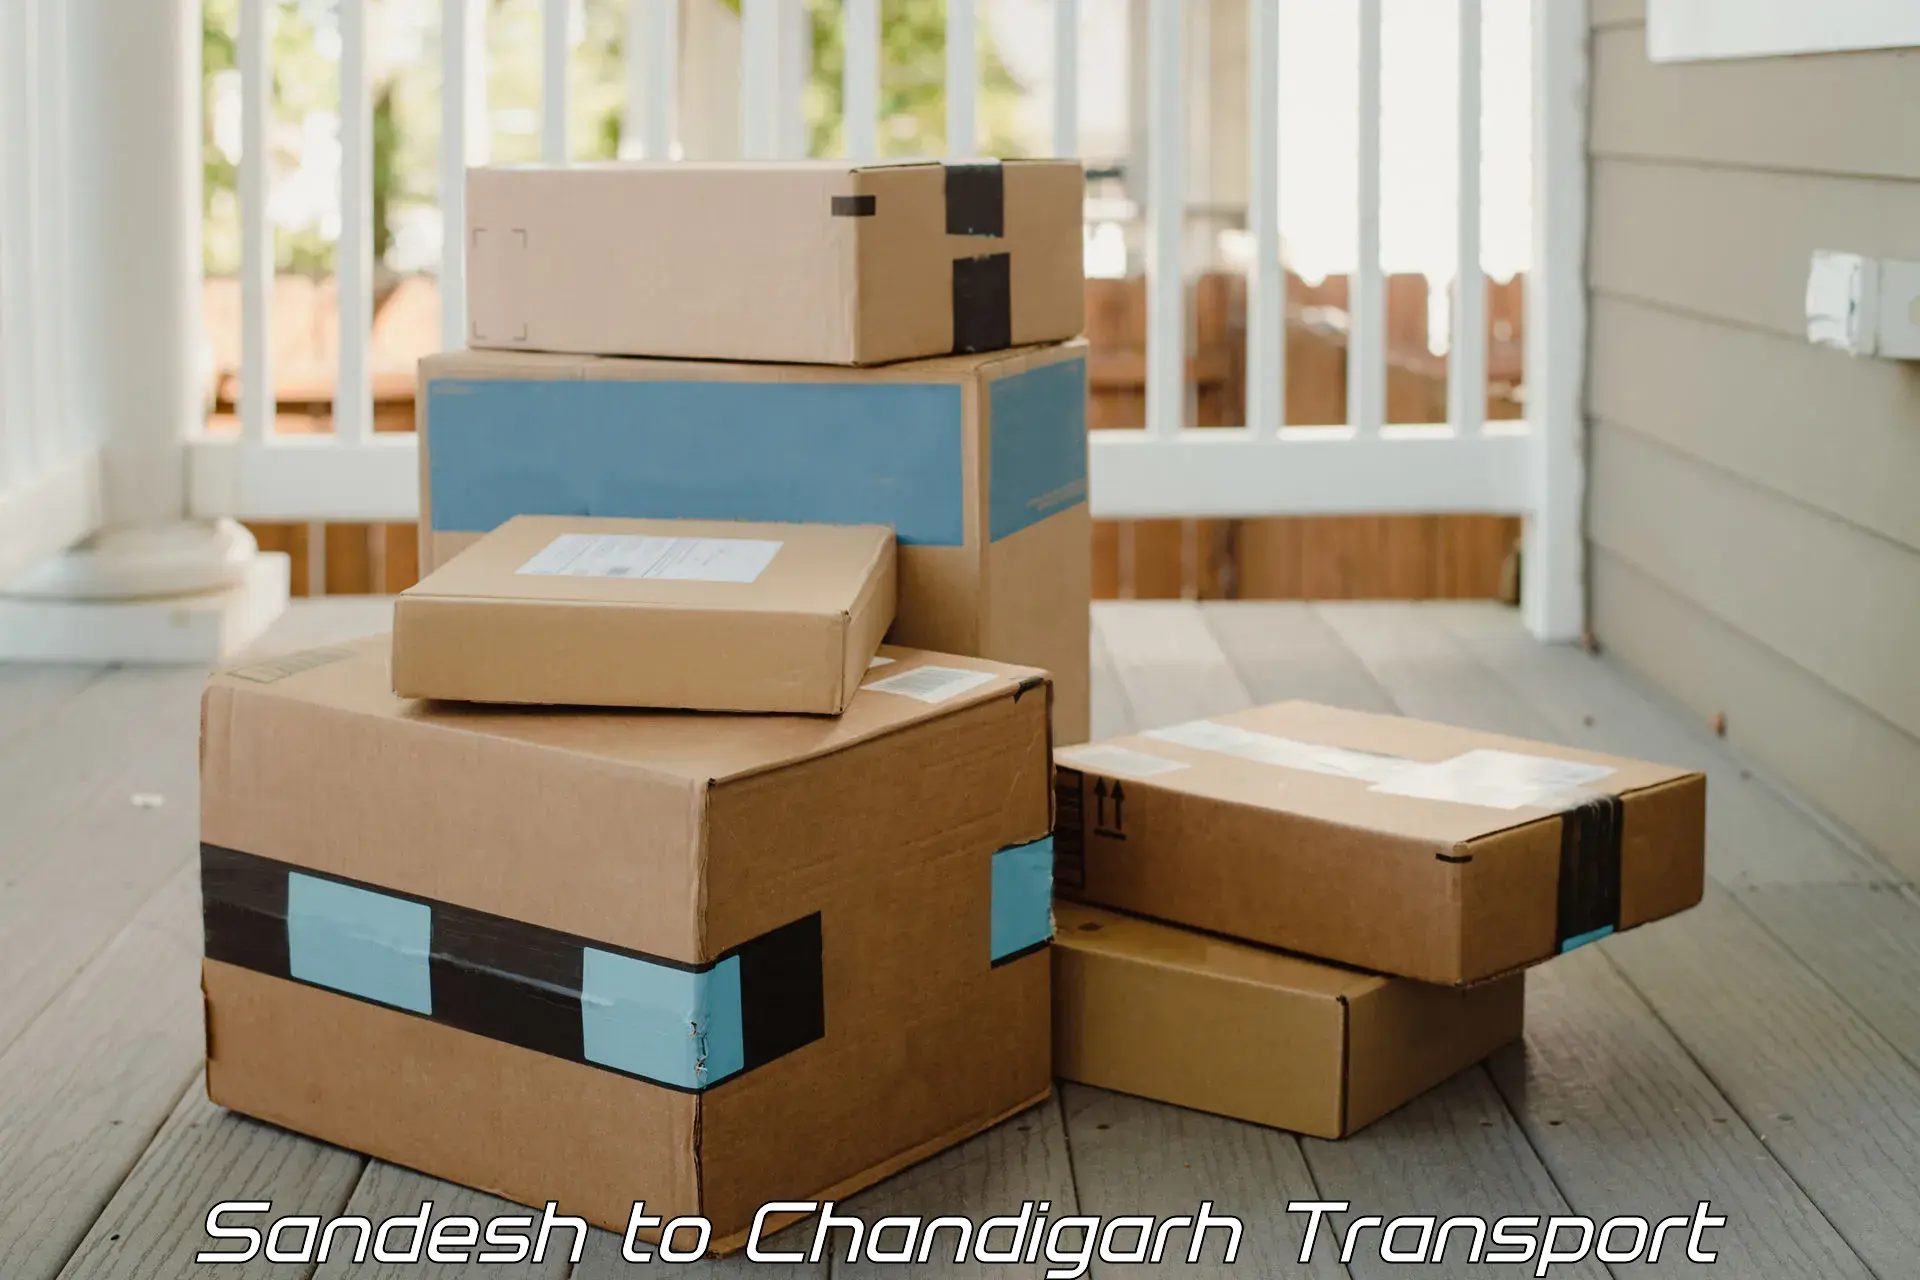 Container transport service Sandesh to Chandigarh